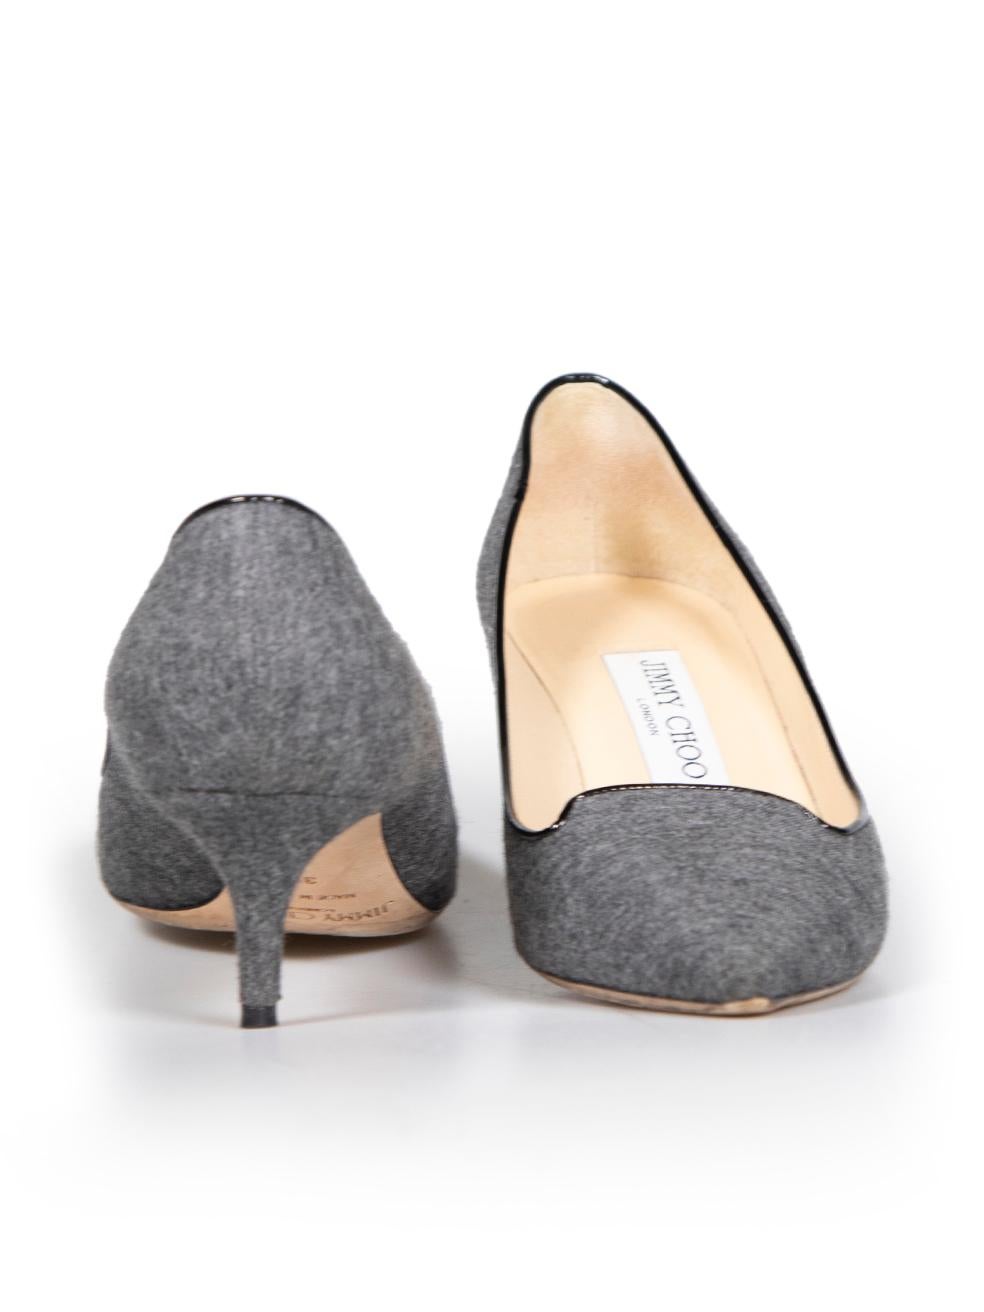 Jimmy Choo Grey Wool Pointed Toe Pumps Size IT 36 In Good Condition For Sale In London, GB